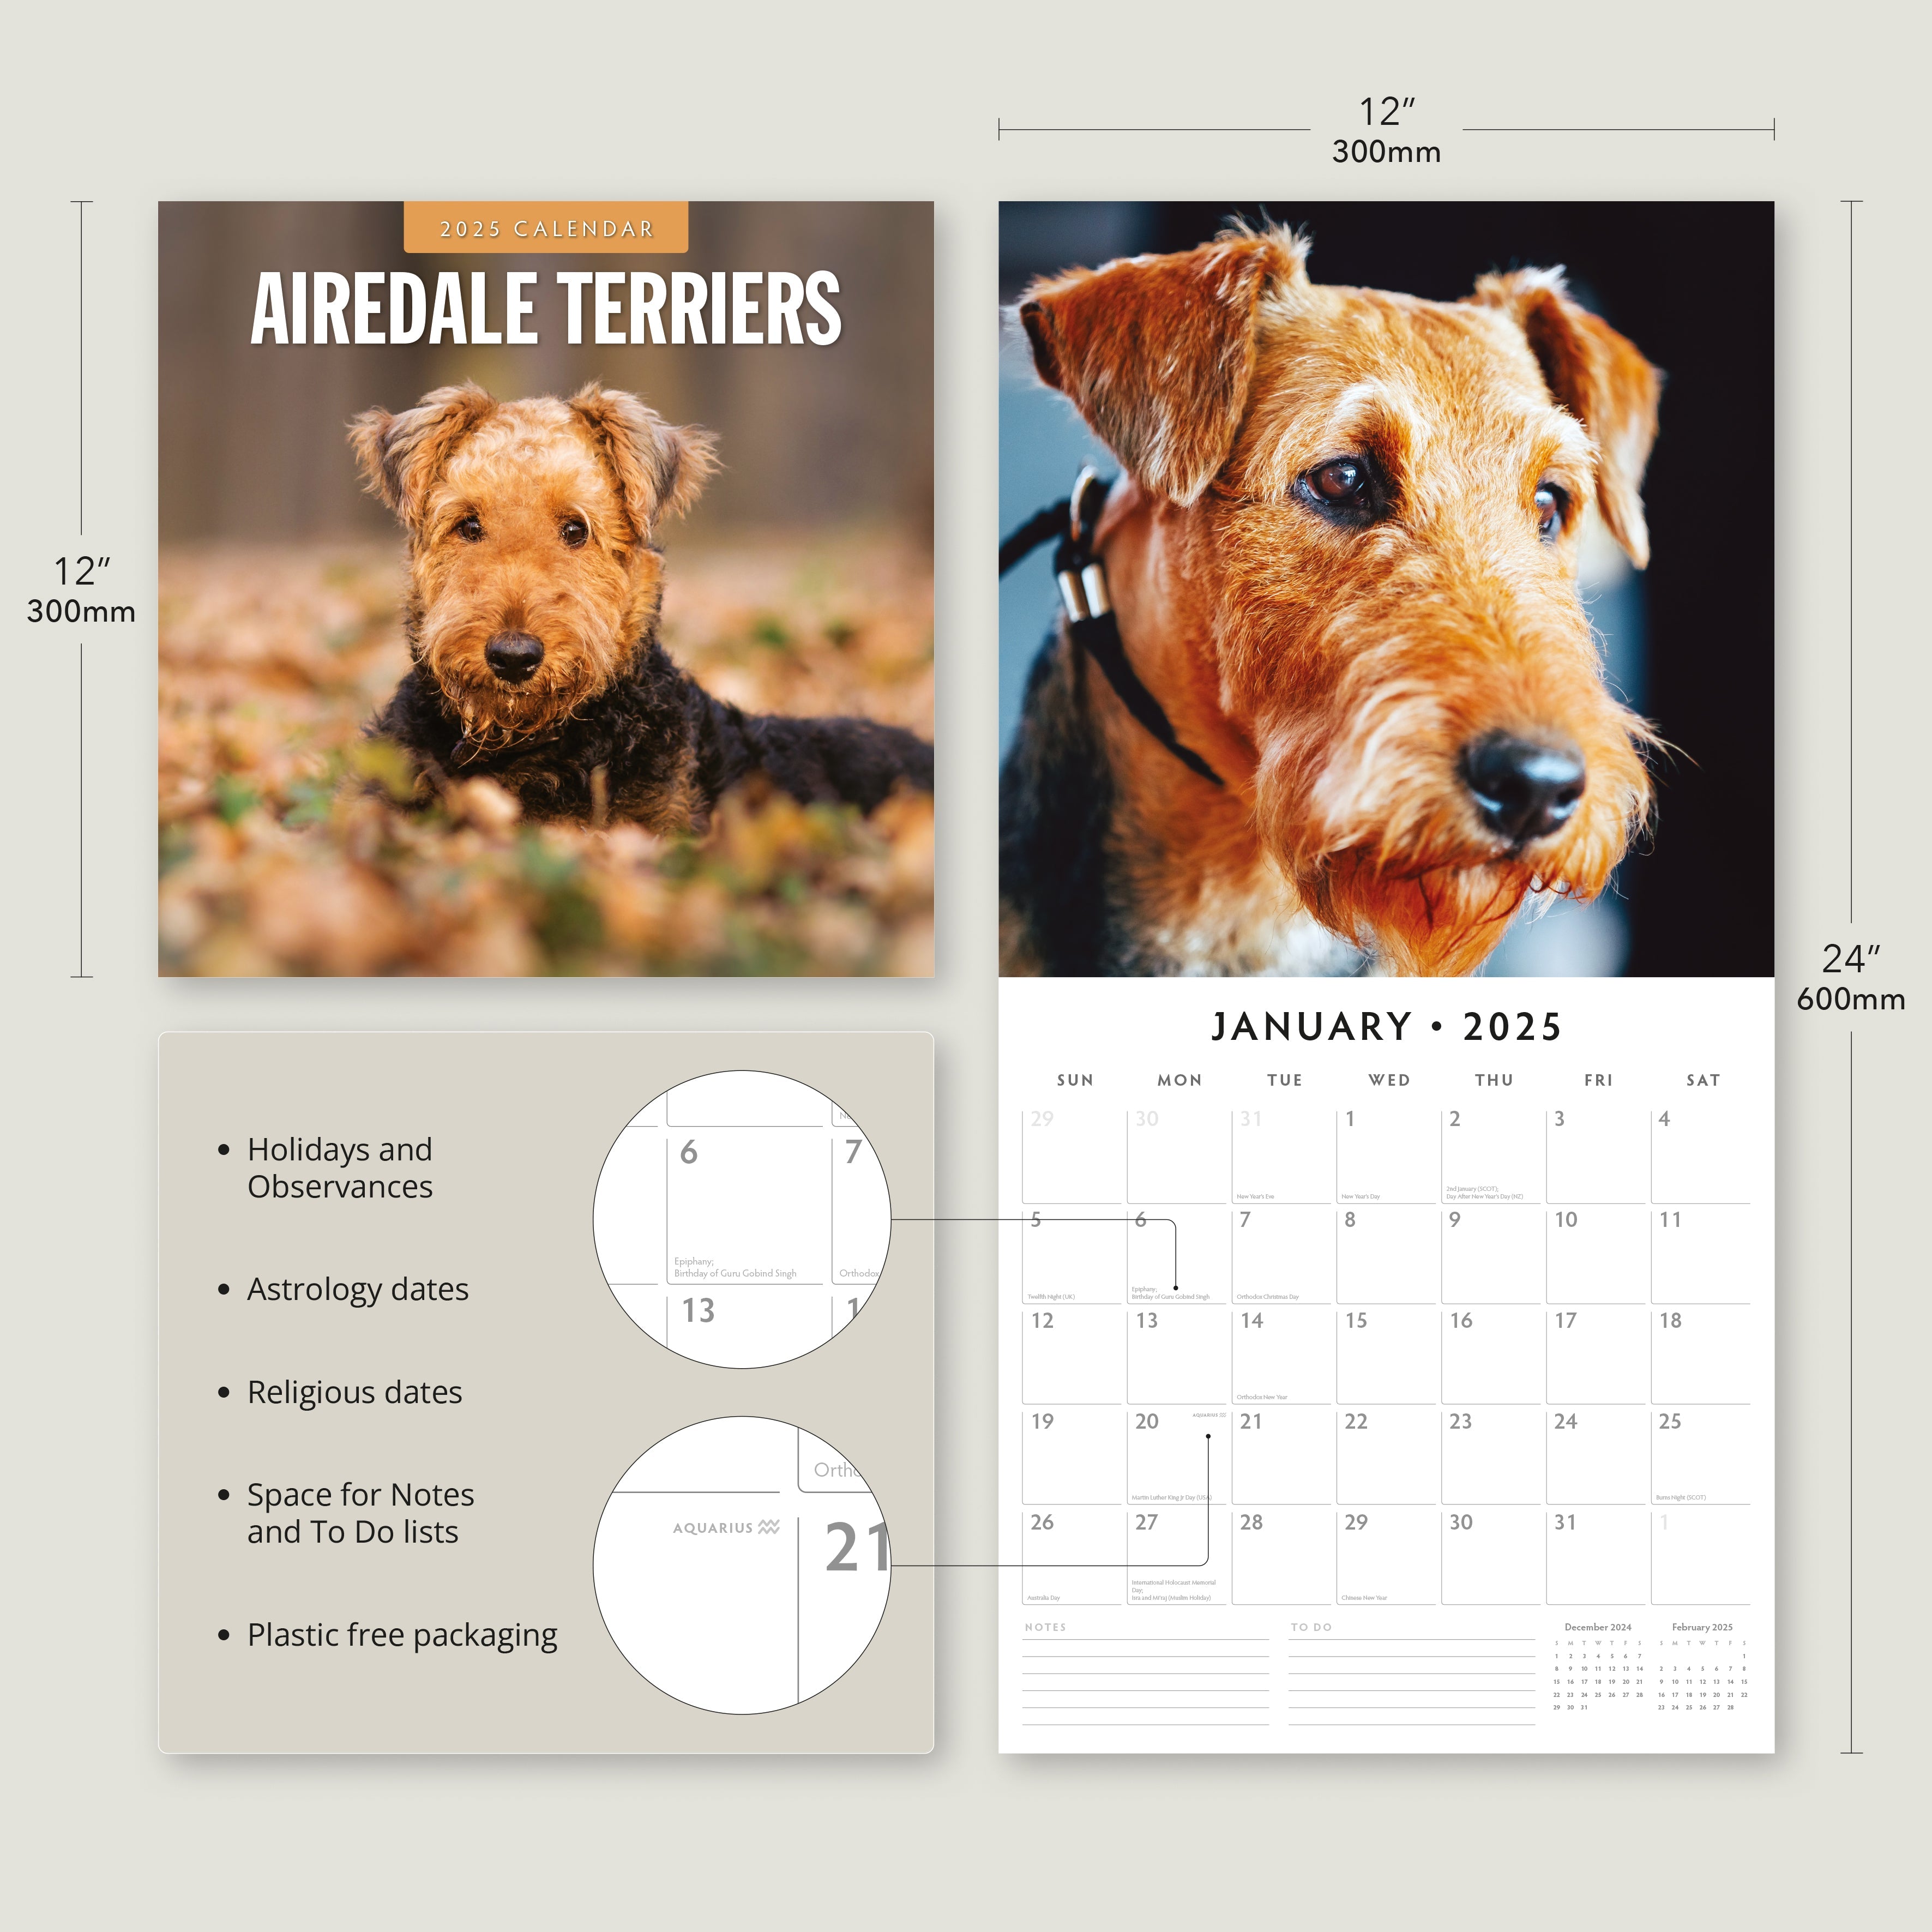 2025 Airedale Terriers - Square Wall Calendar